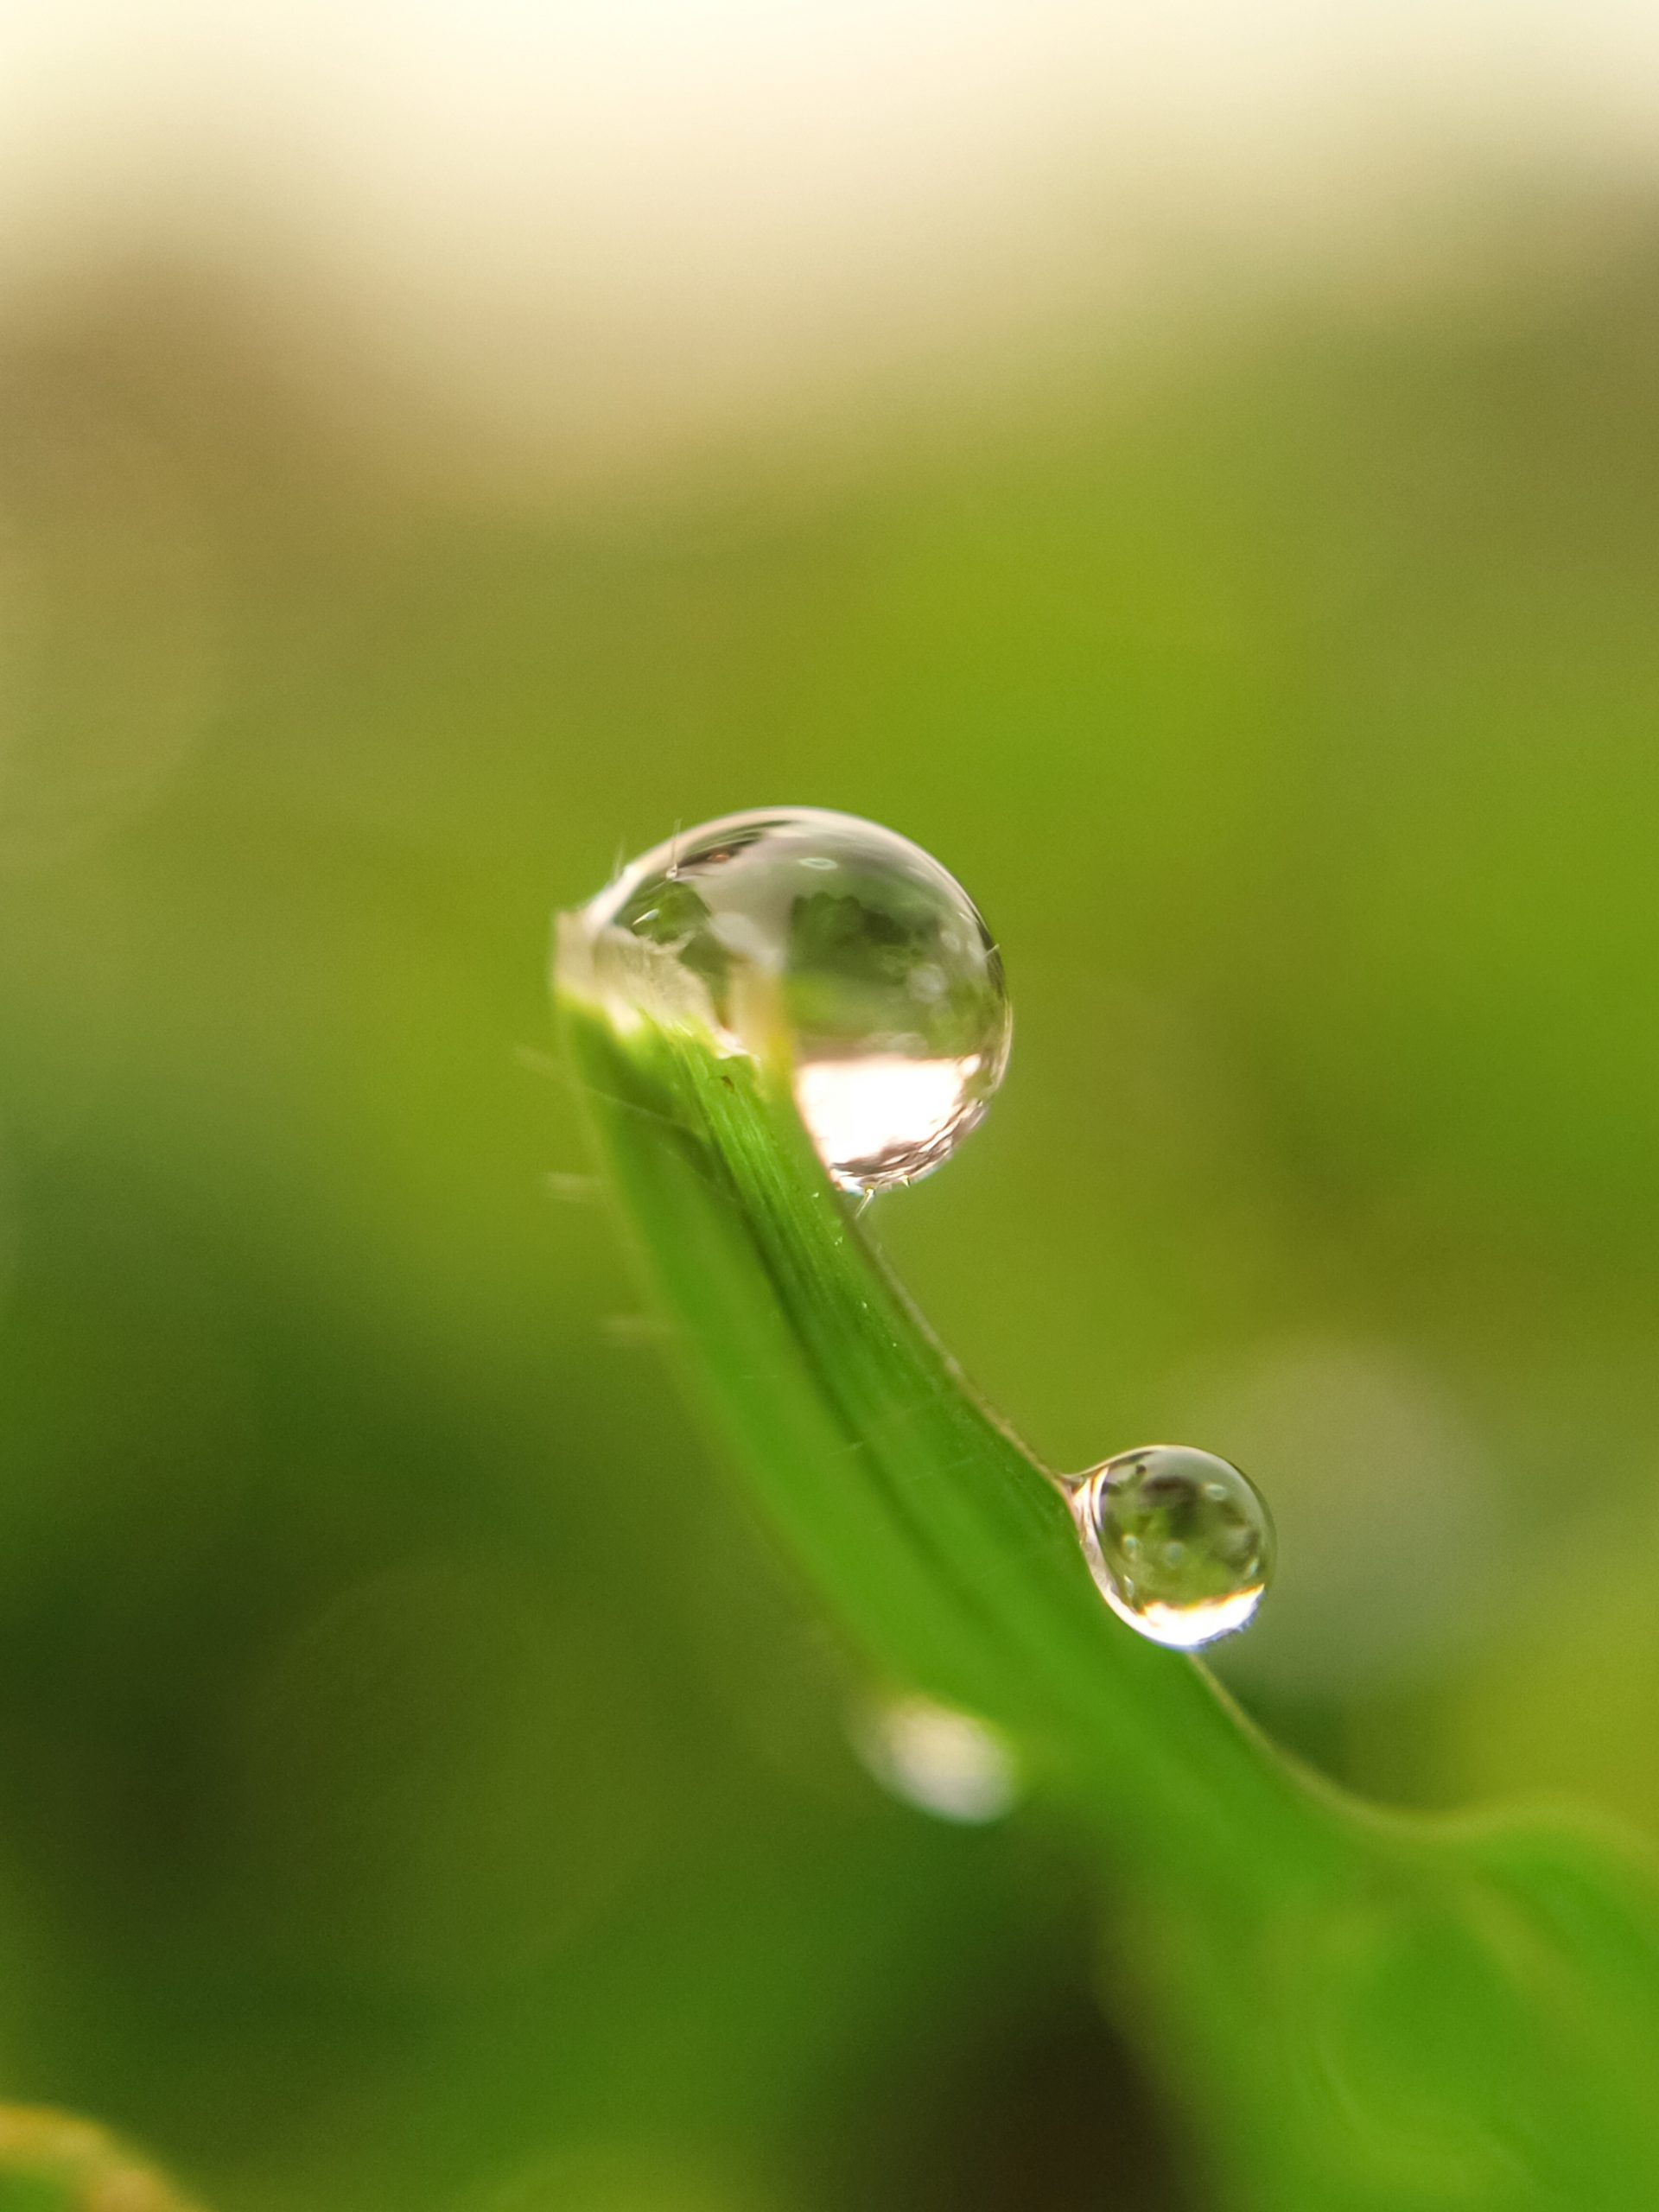 Water drops on a plant stem